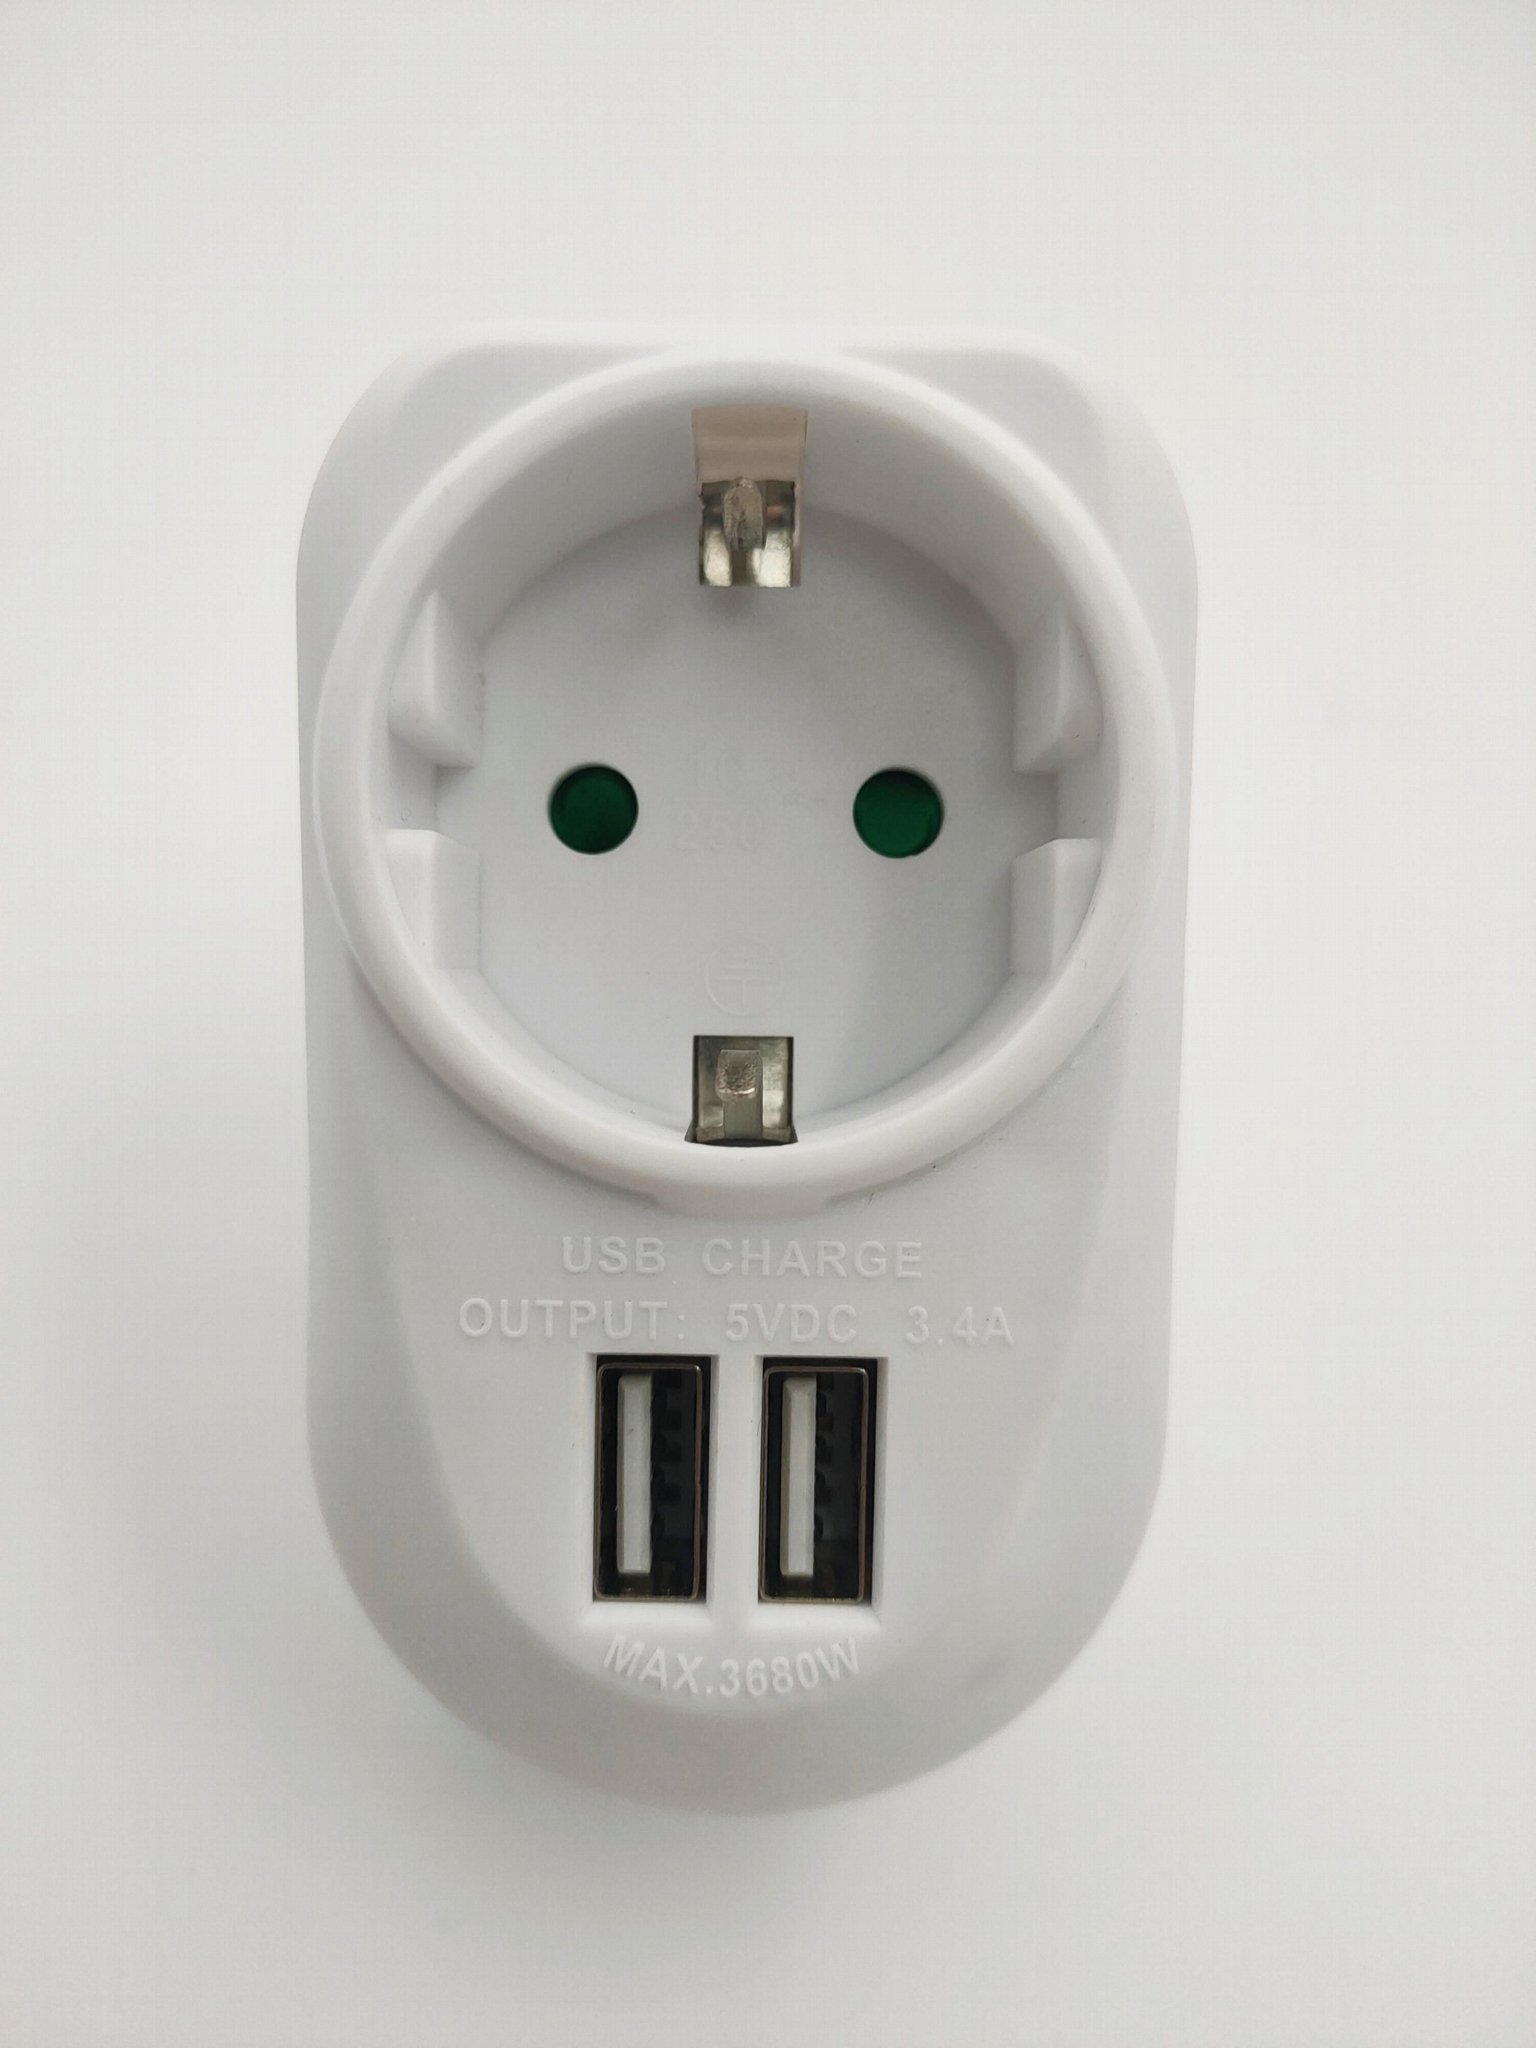 Germany type adapter with USB charge